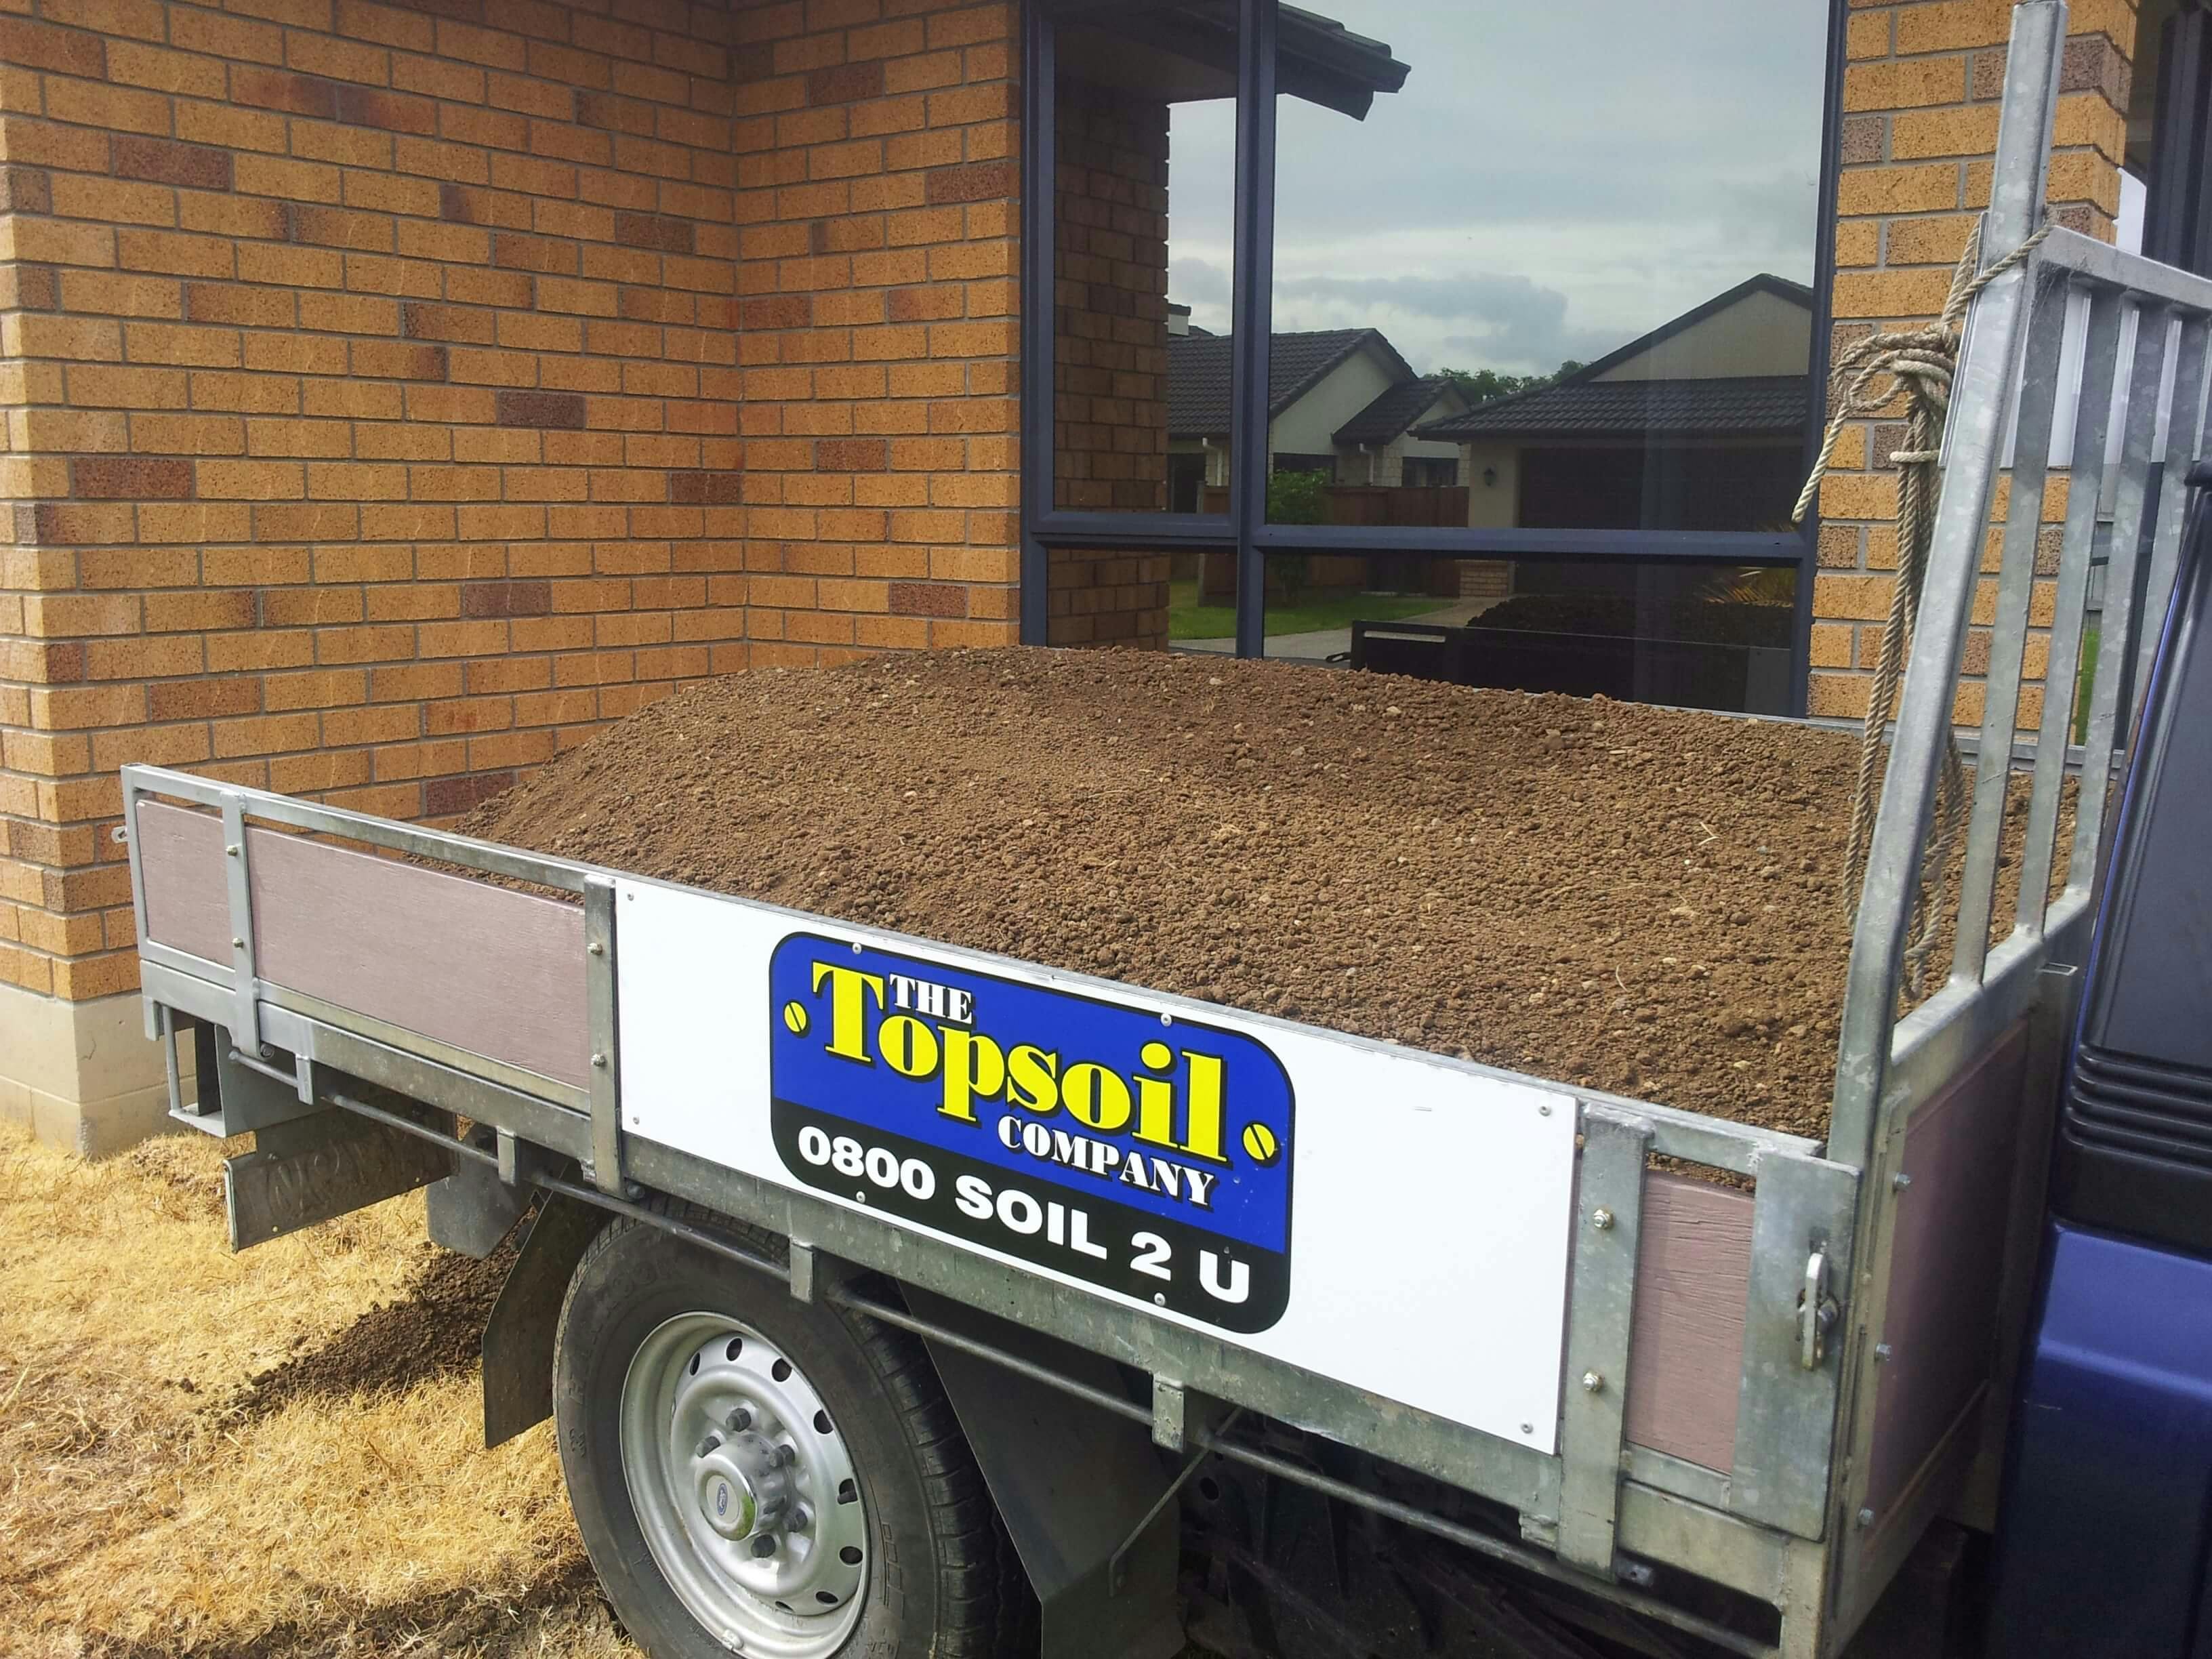 Our topsoil